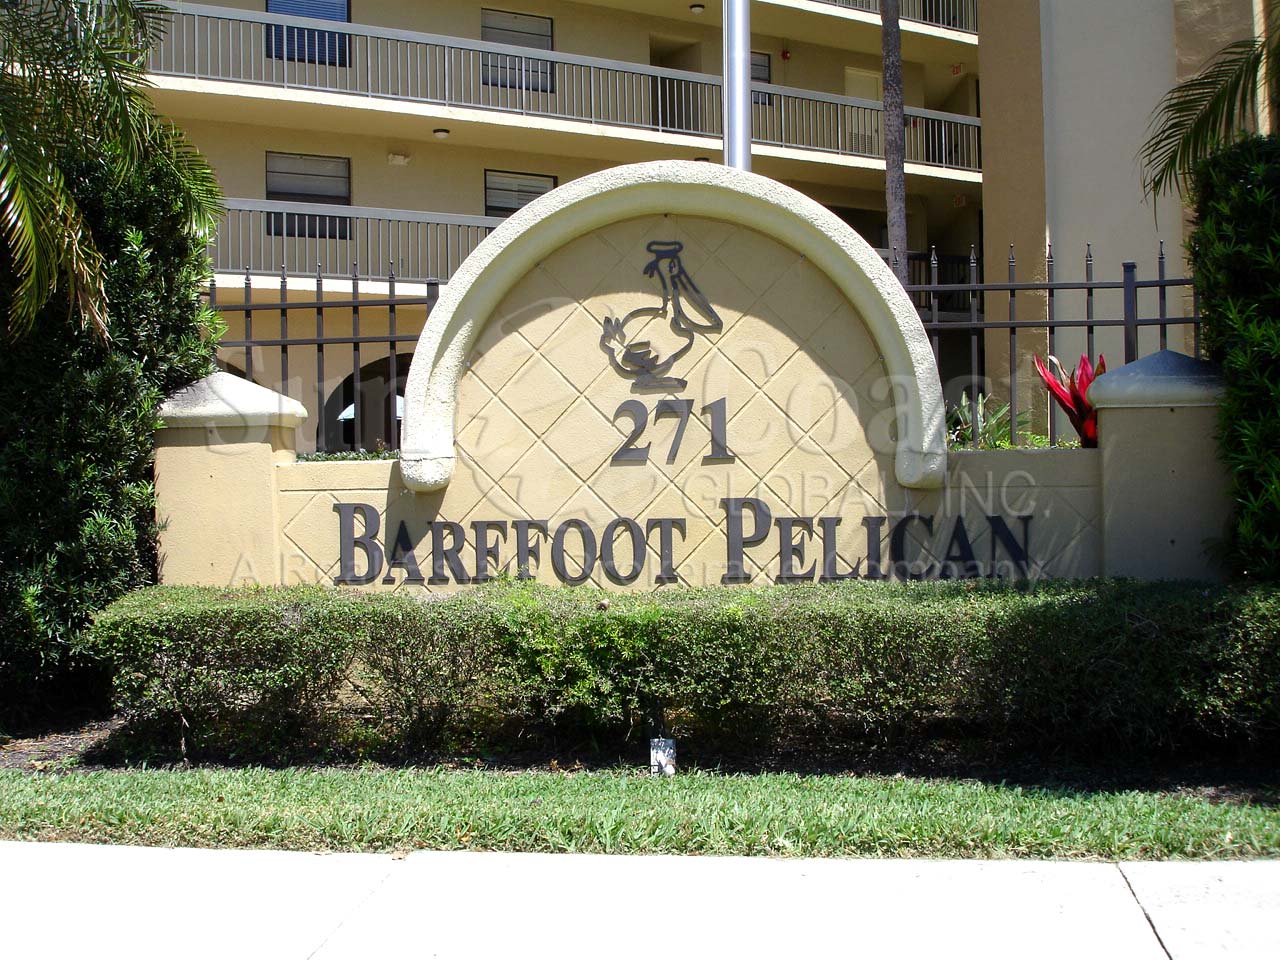 Barefoot Pelican Signage